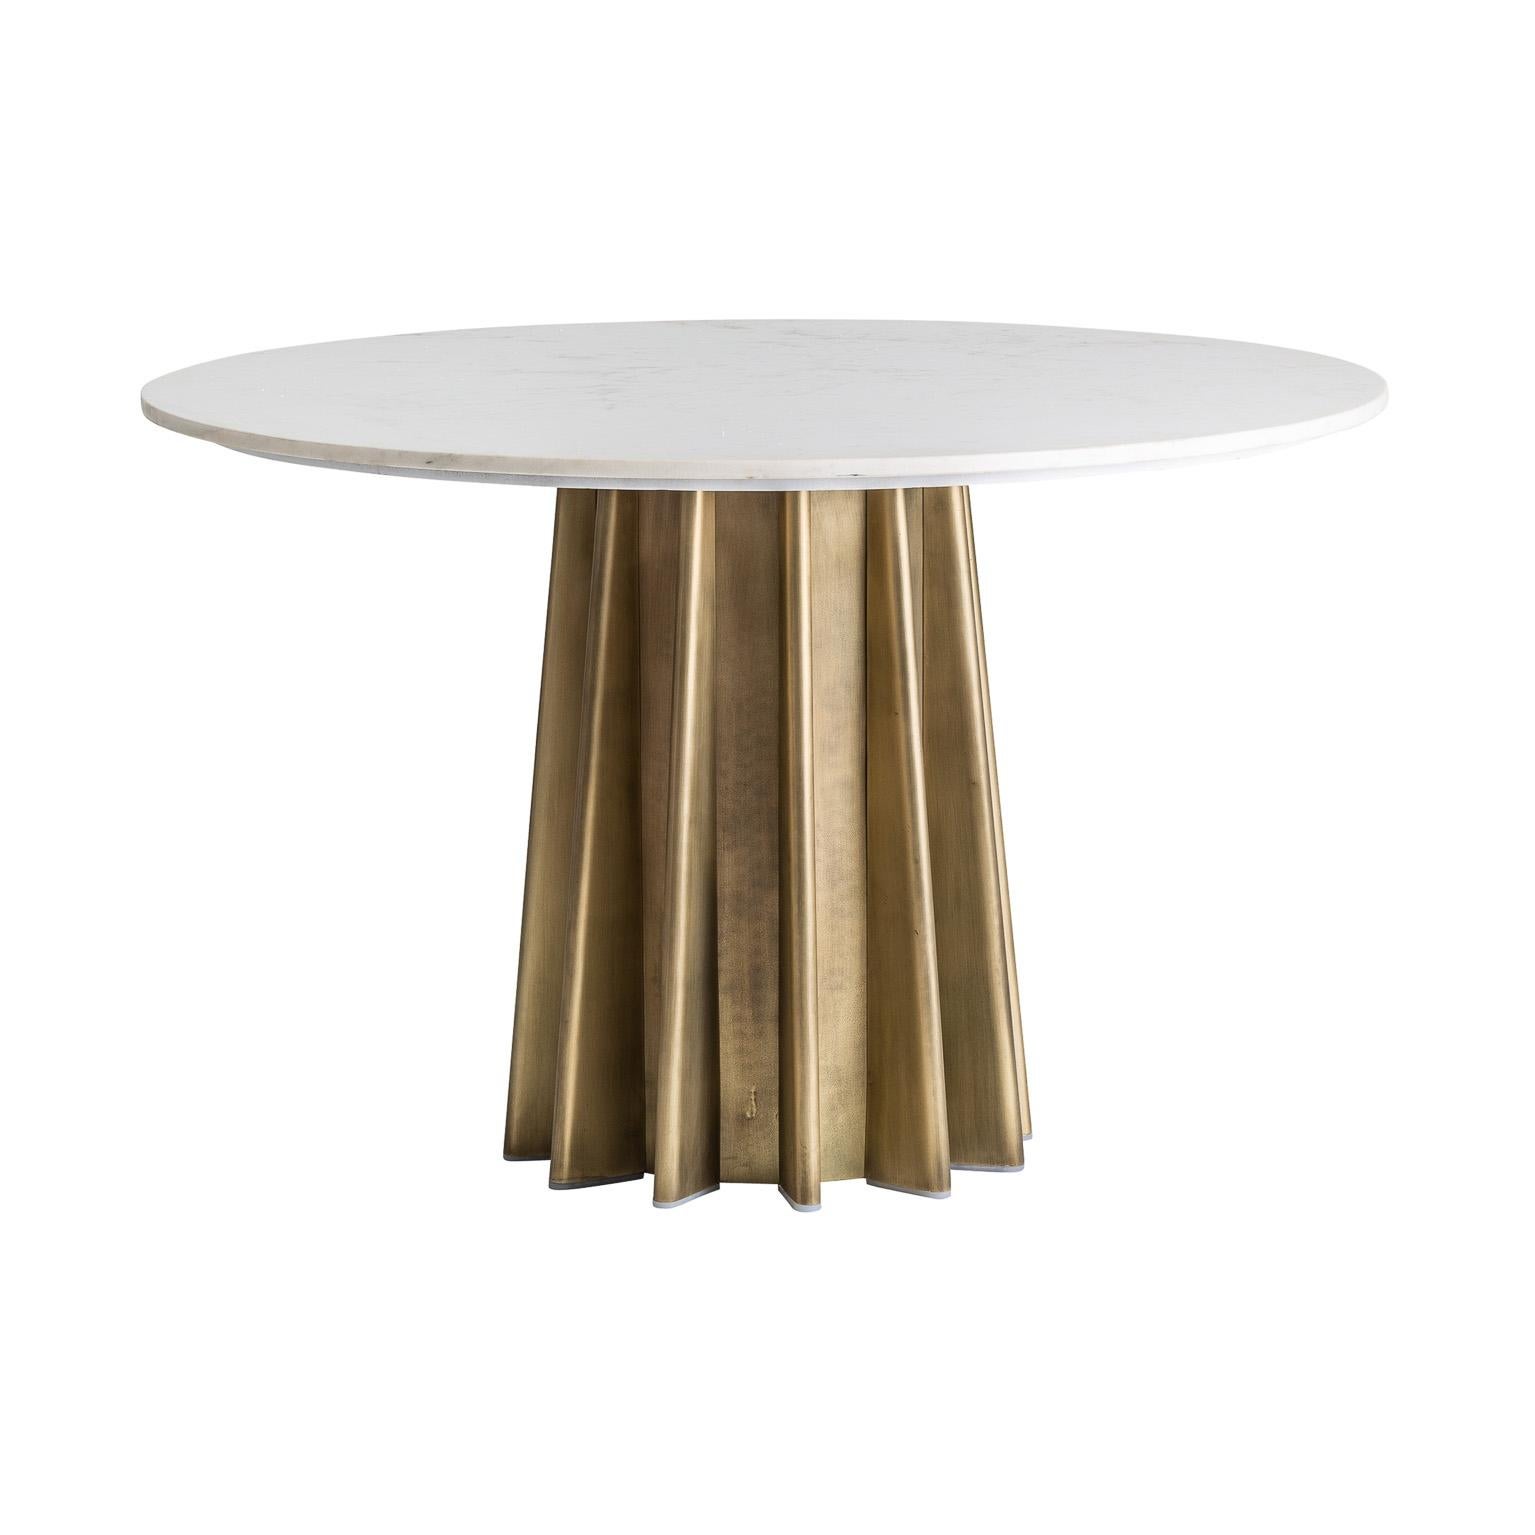 1970s Italian Design Style Round Marble and Metal Pedestal Table For Sale 1